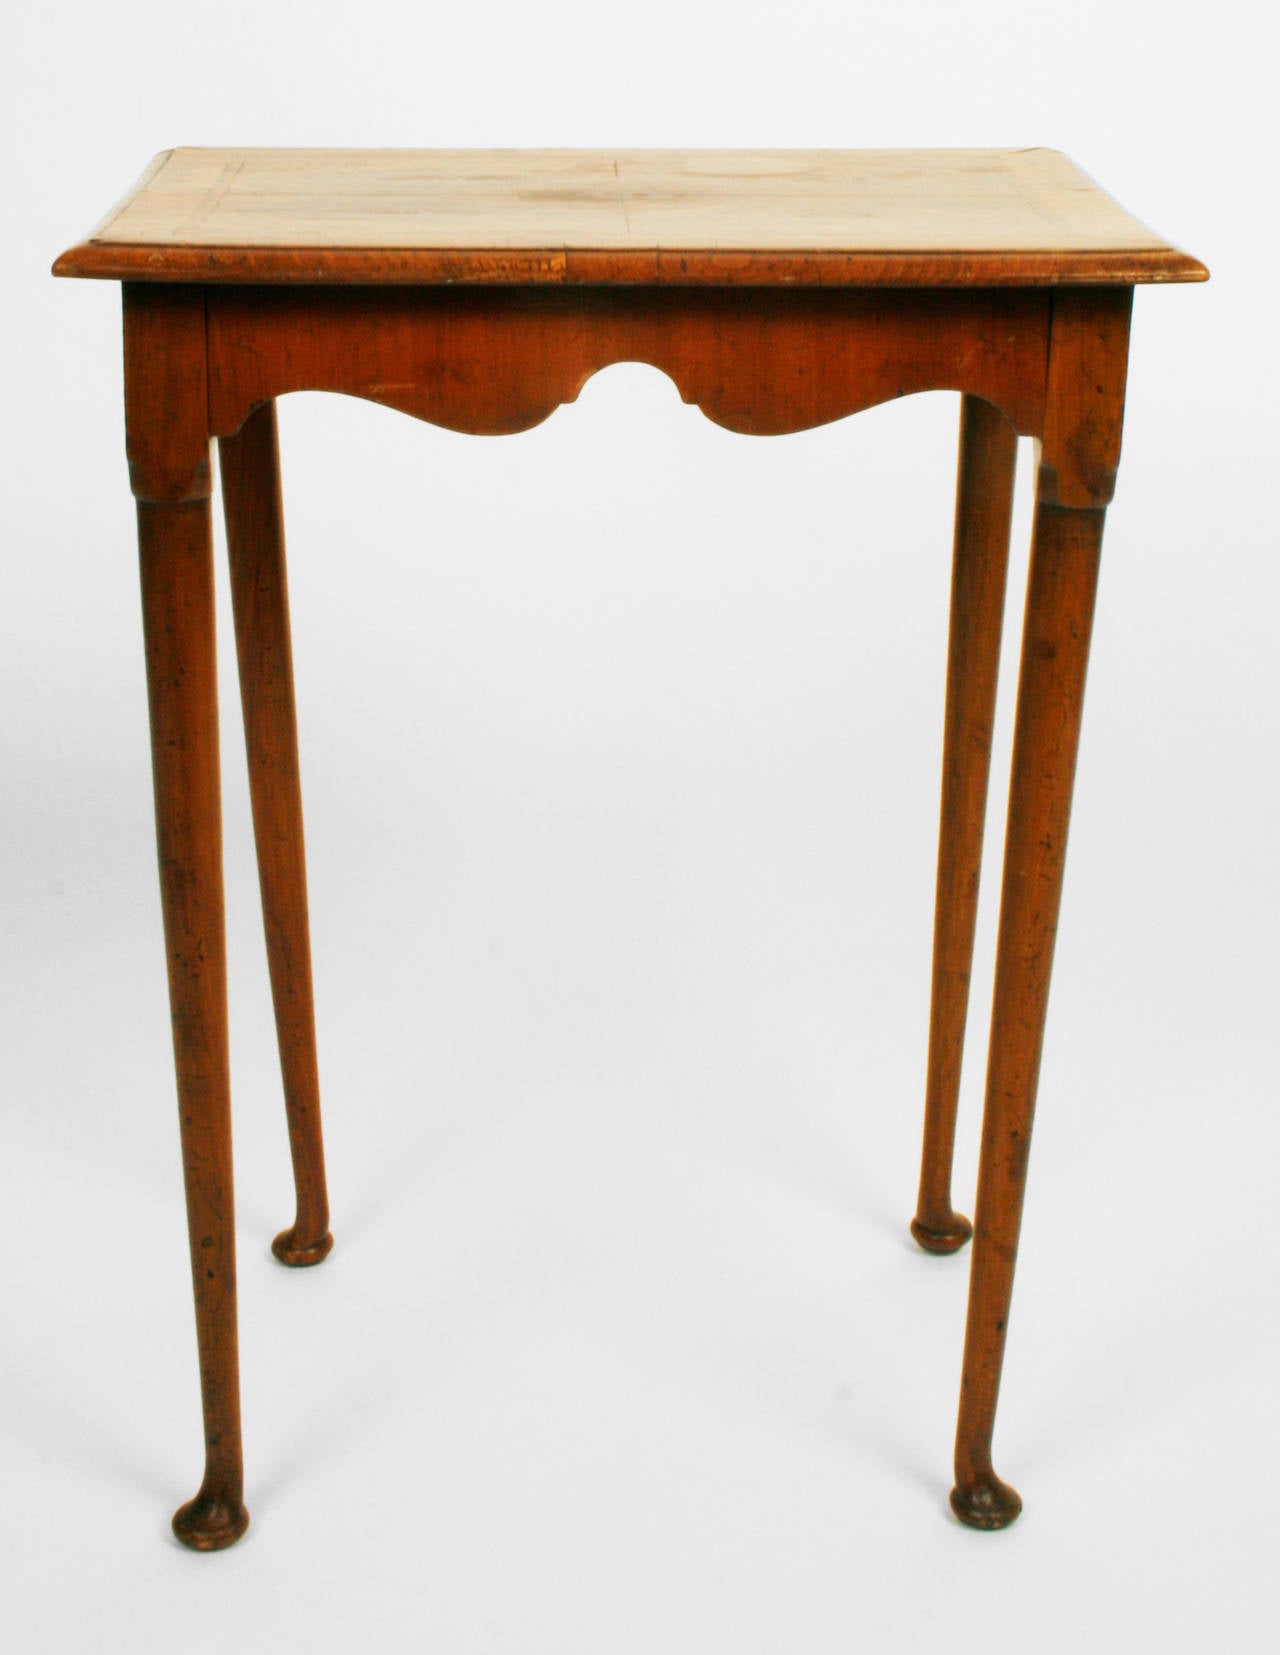 This graceful side table is in the Queen Anne style. It is made of burled walnut with a bookmatch veneered top, scalloped apron and cabriole legs. The perfect side table for a room needing a light touch.